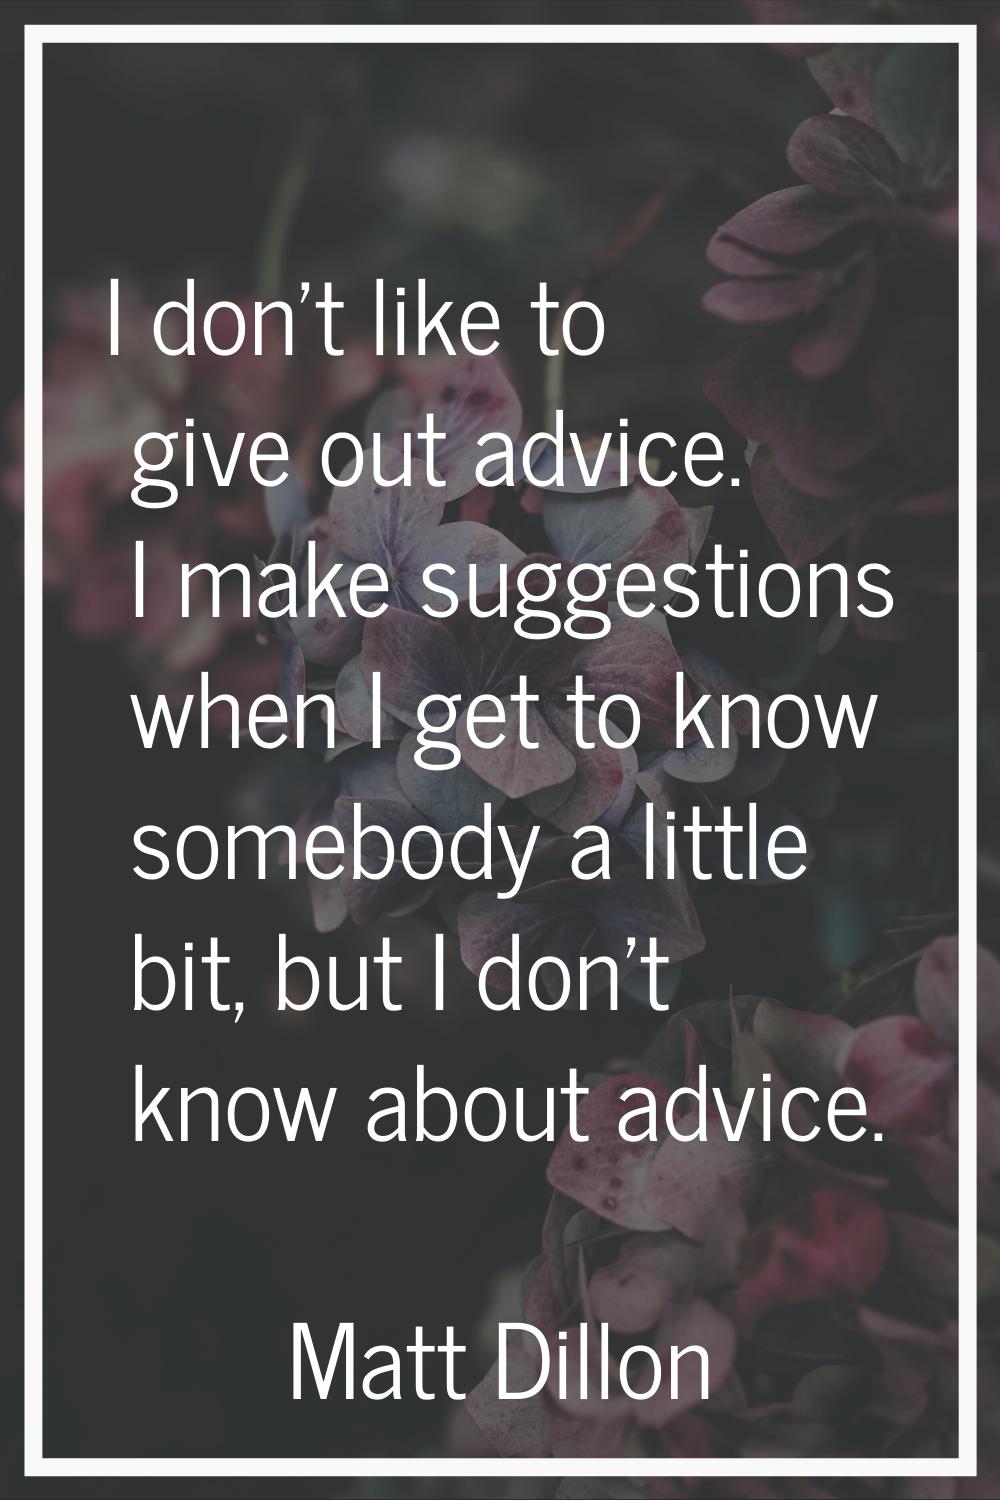 I don't like to give out advice. I make suggestions when I get to know somebody a little bit, but I